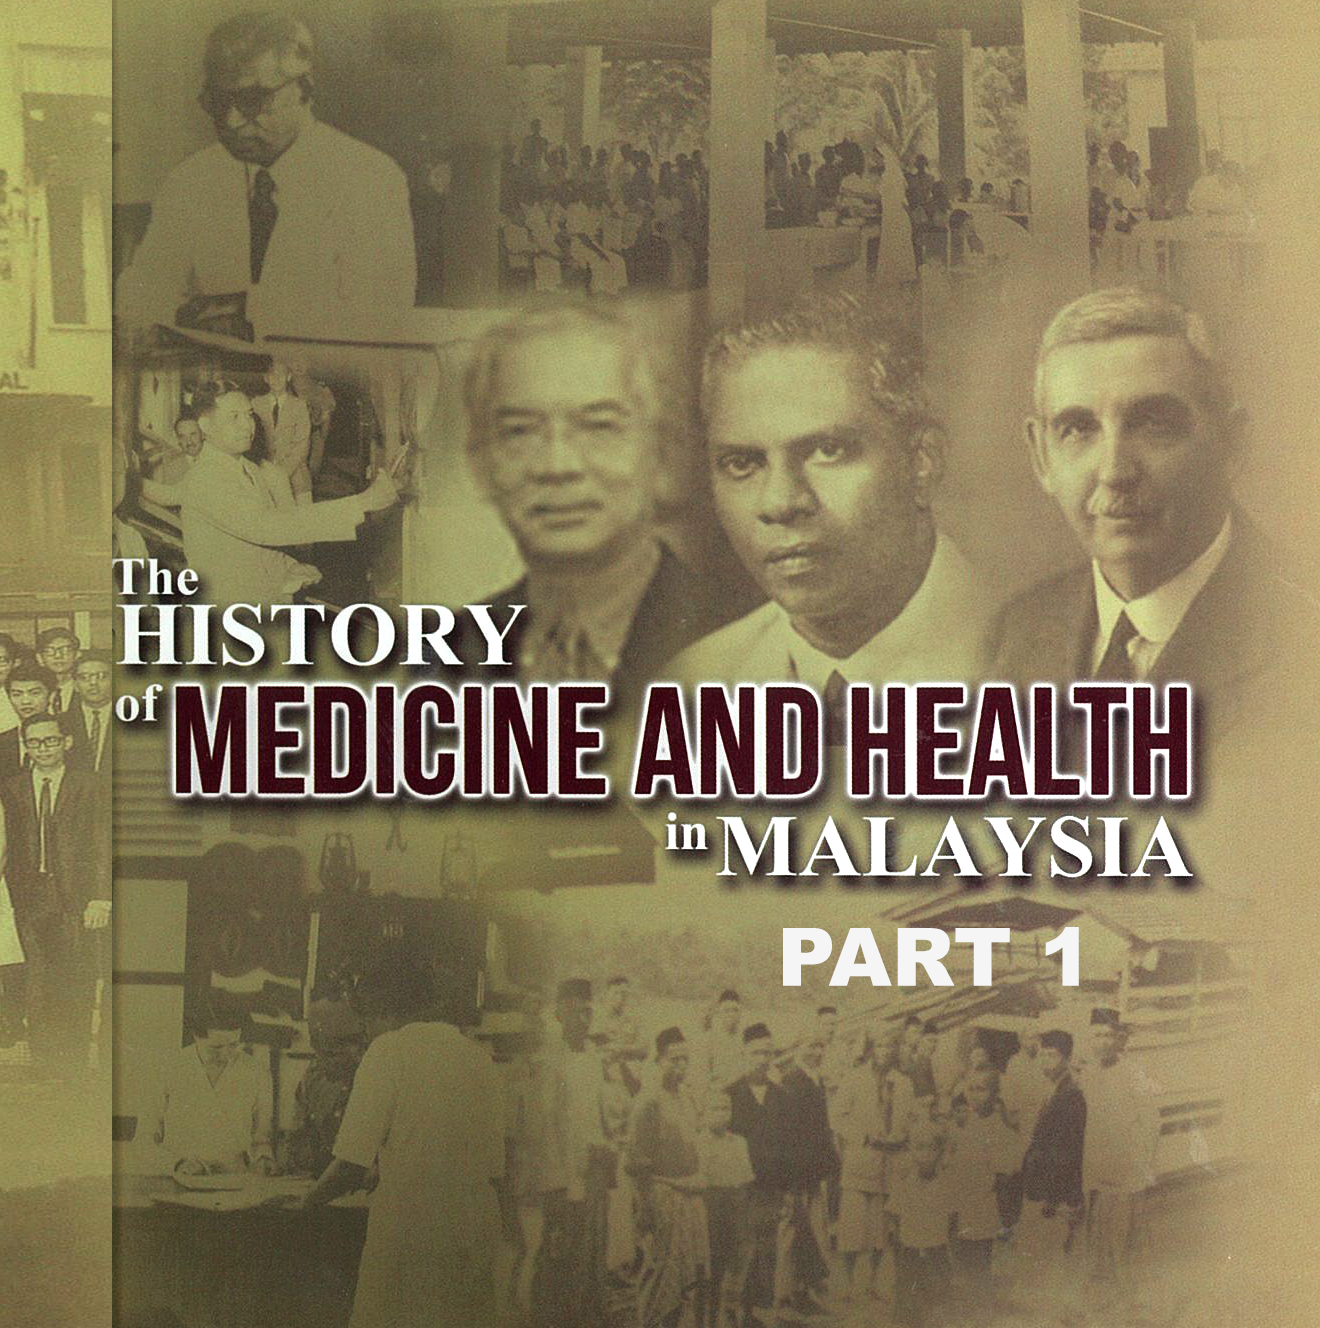 The History of Medicine in Malaysia (Part 1)